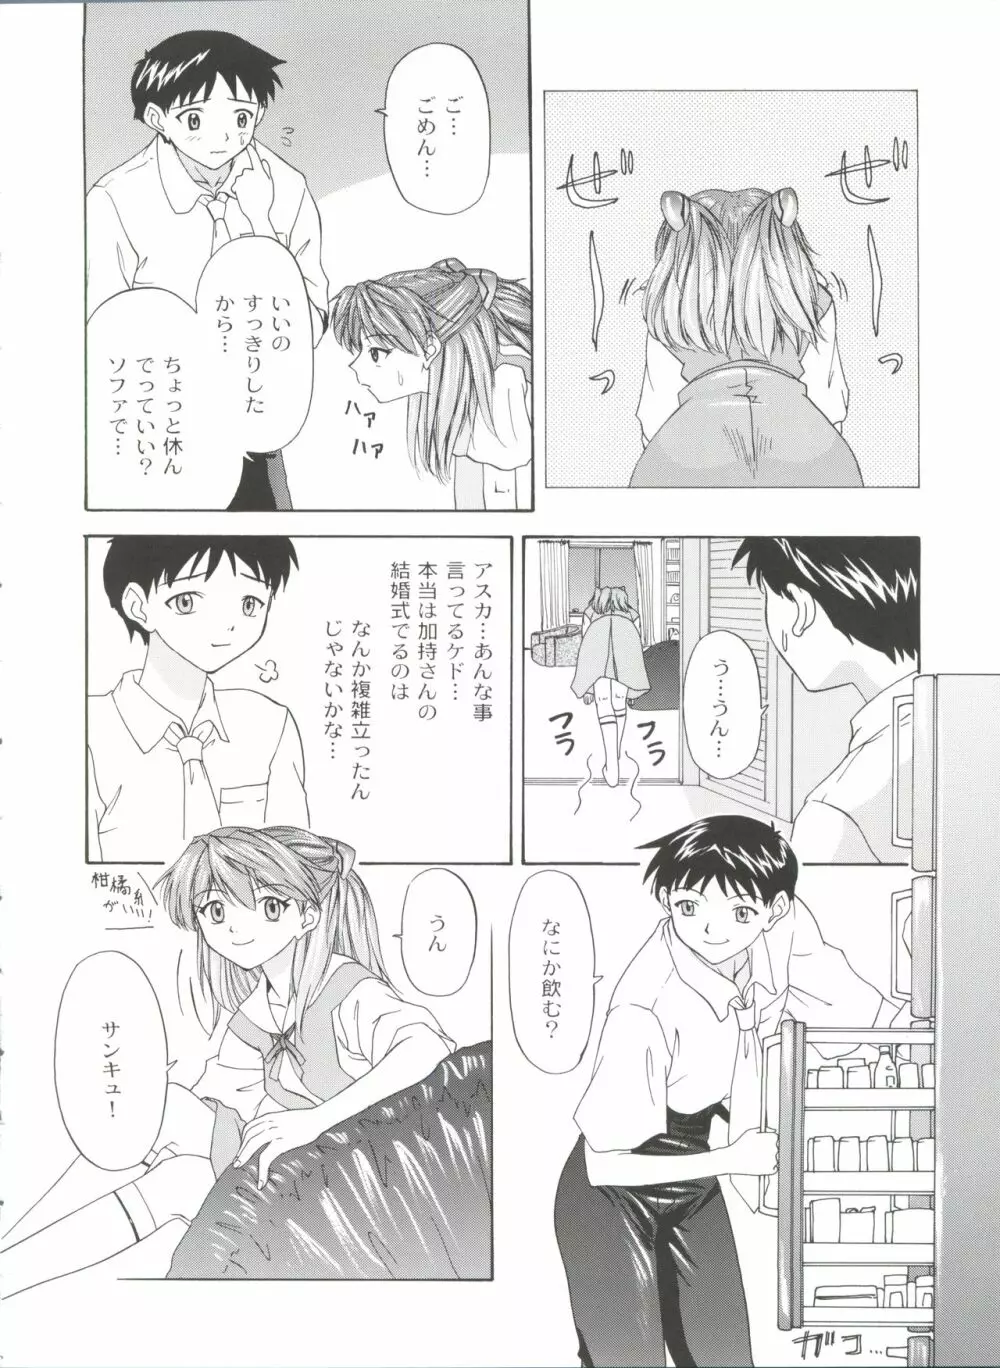 1999 ONLY ASKA - page12